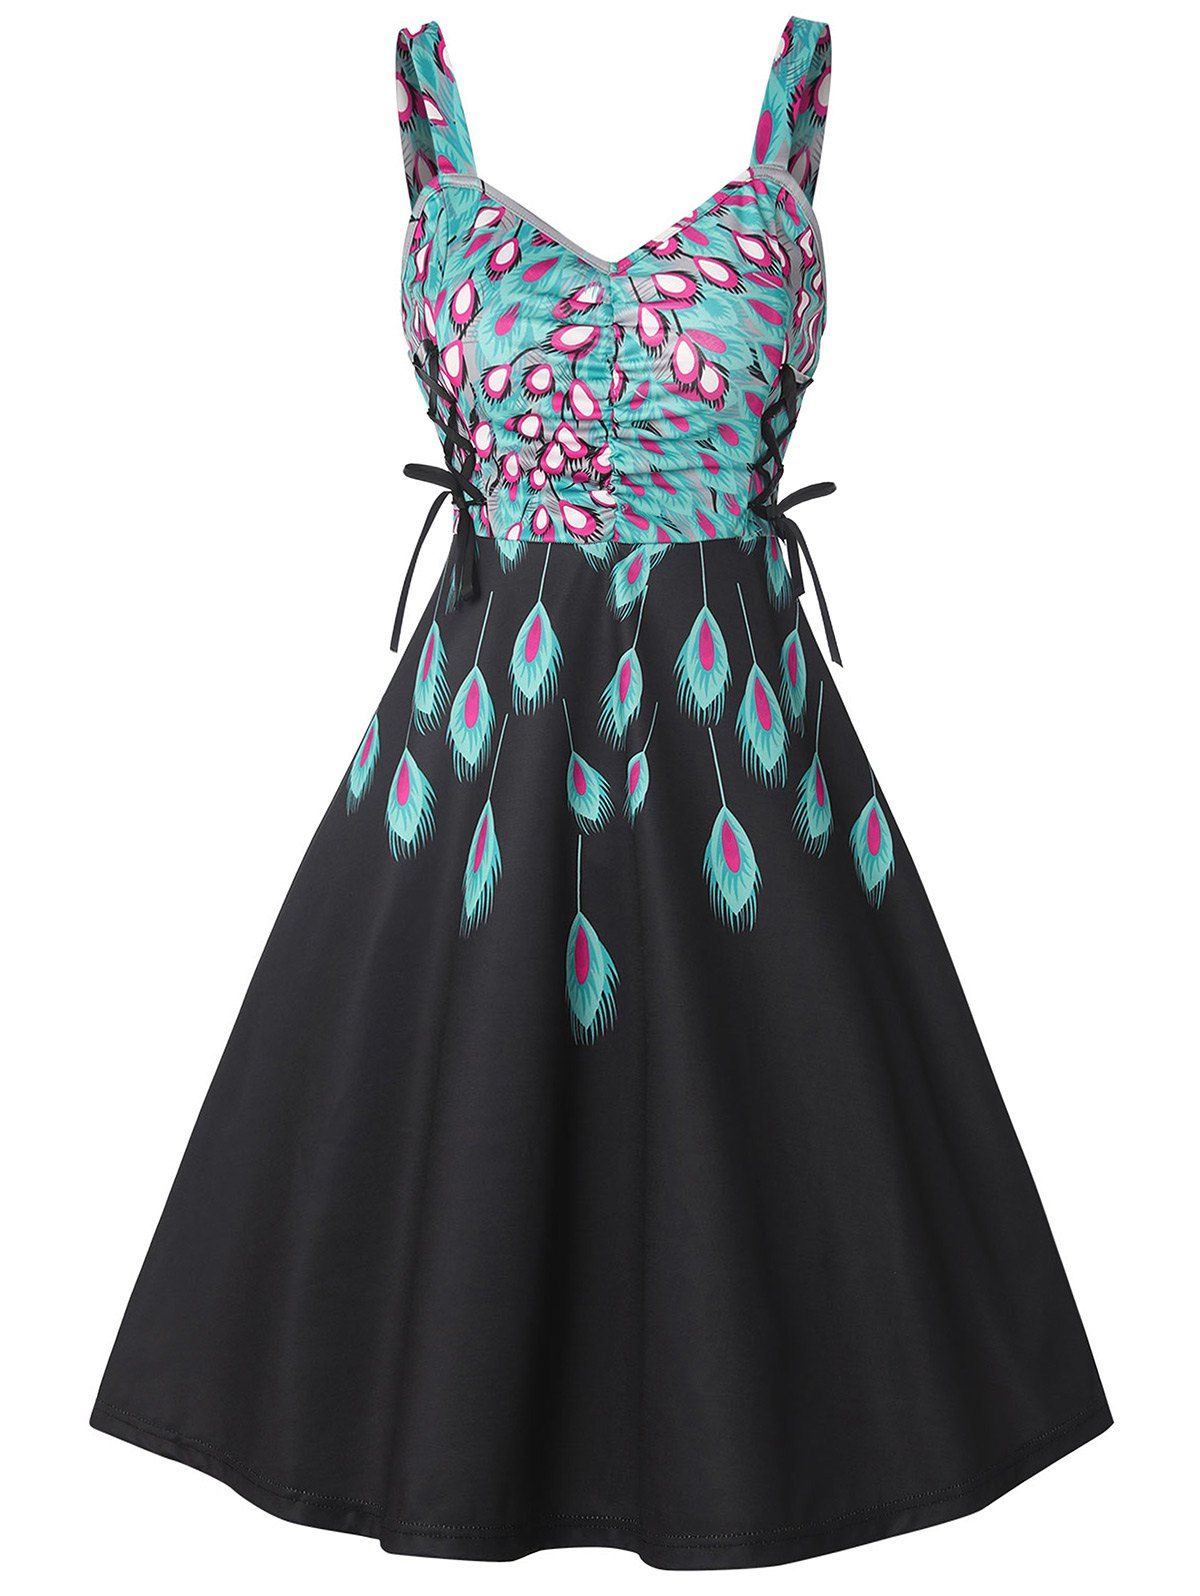 Peacock Feather Print A Line Dress Lace Up Ruched Bust Sleeveless Midi Dress - BLACK XL